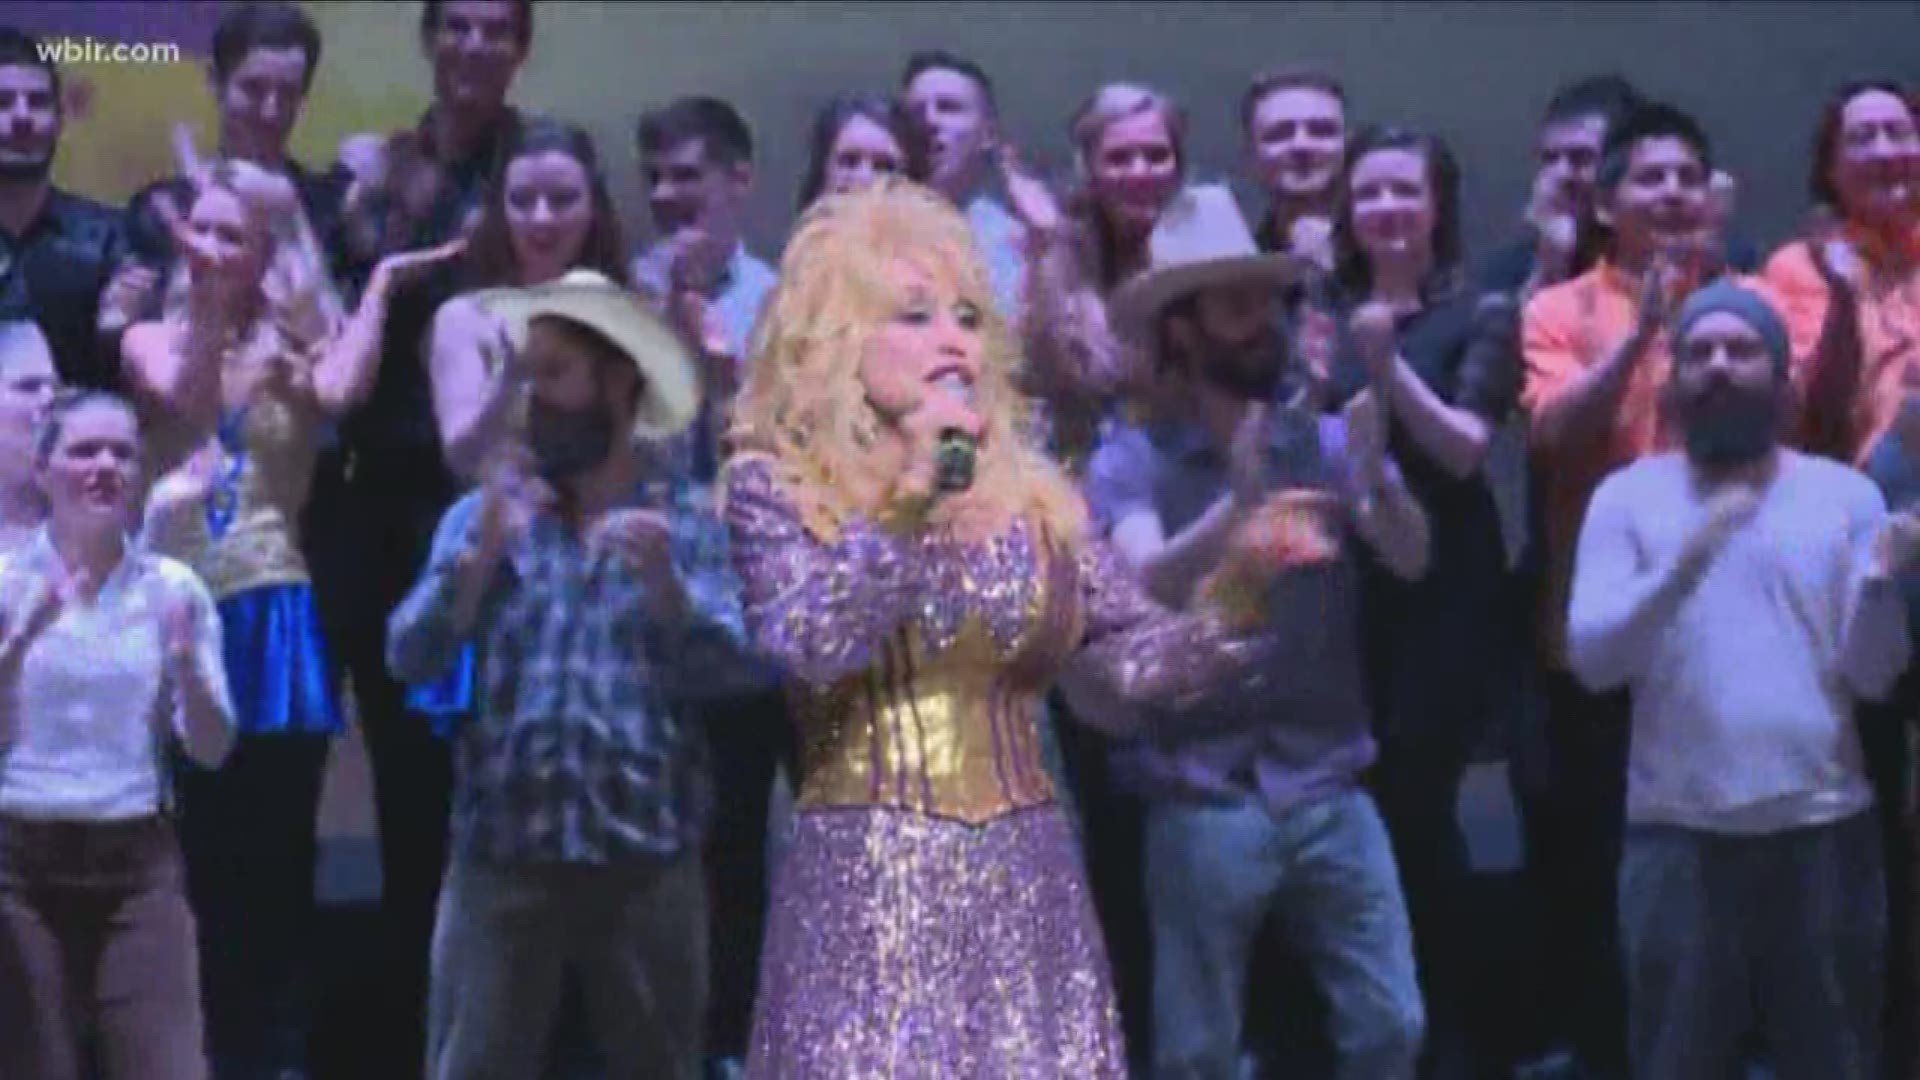 Dolly is working '9 to 5' to produce a new television film series for Netflix in 2019 based on her classic songs.